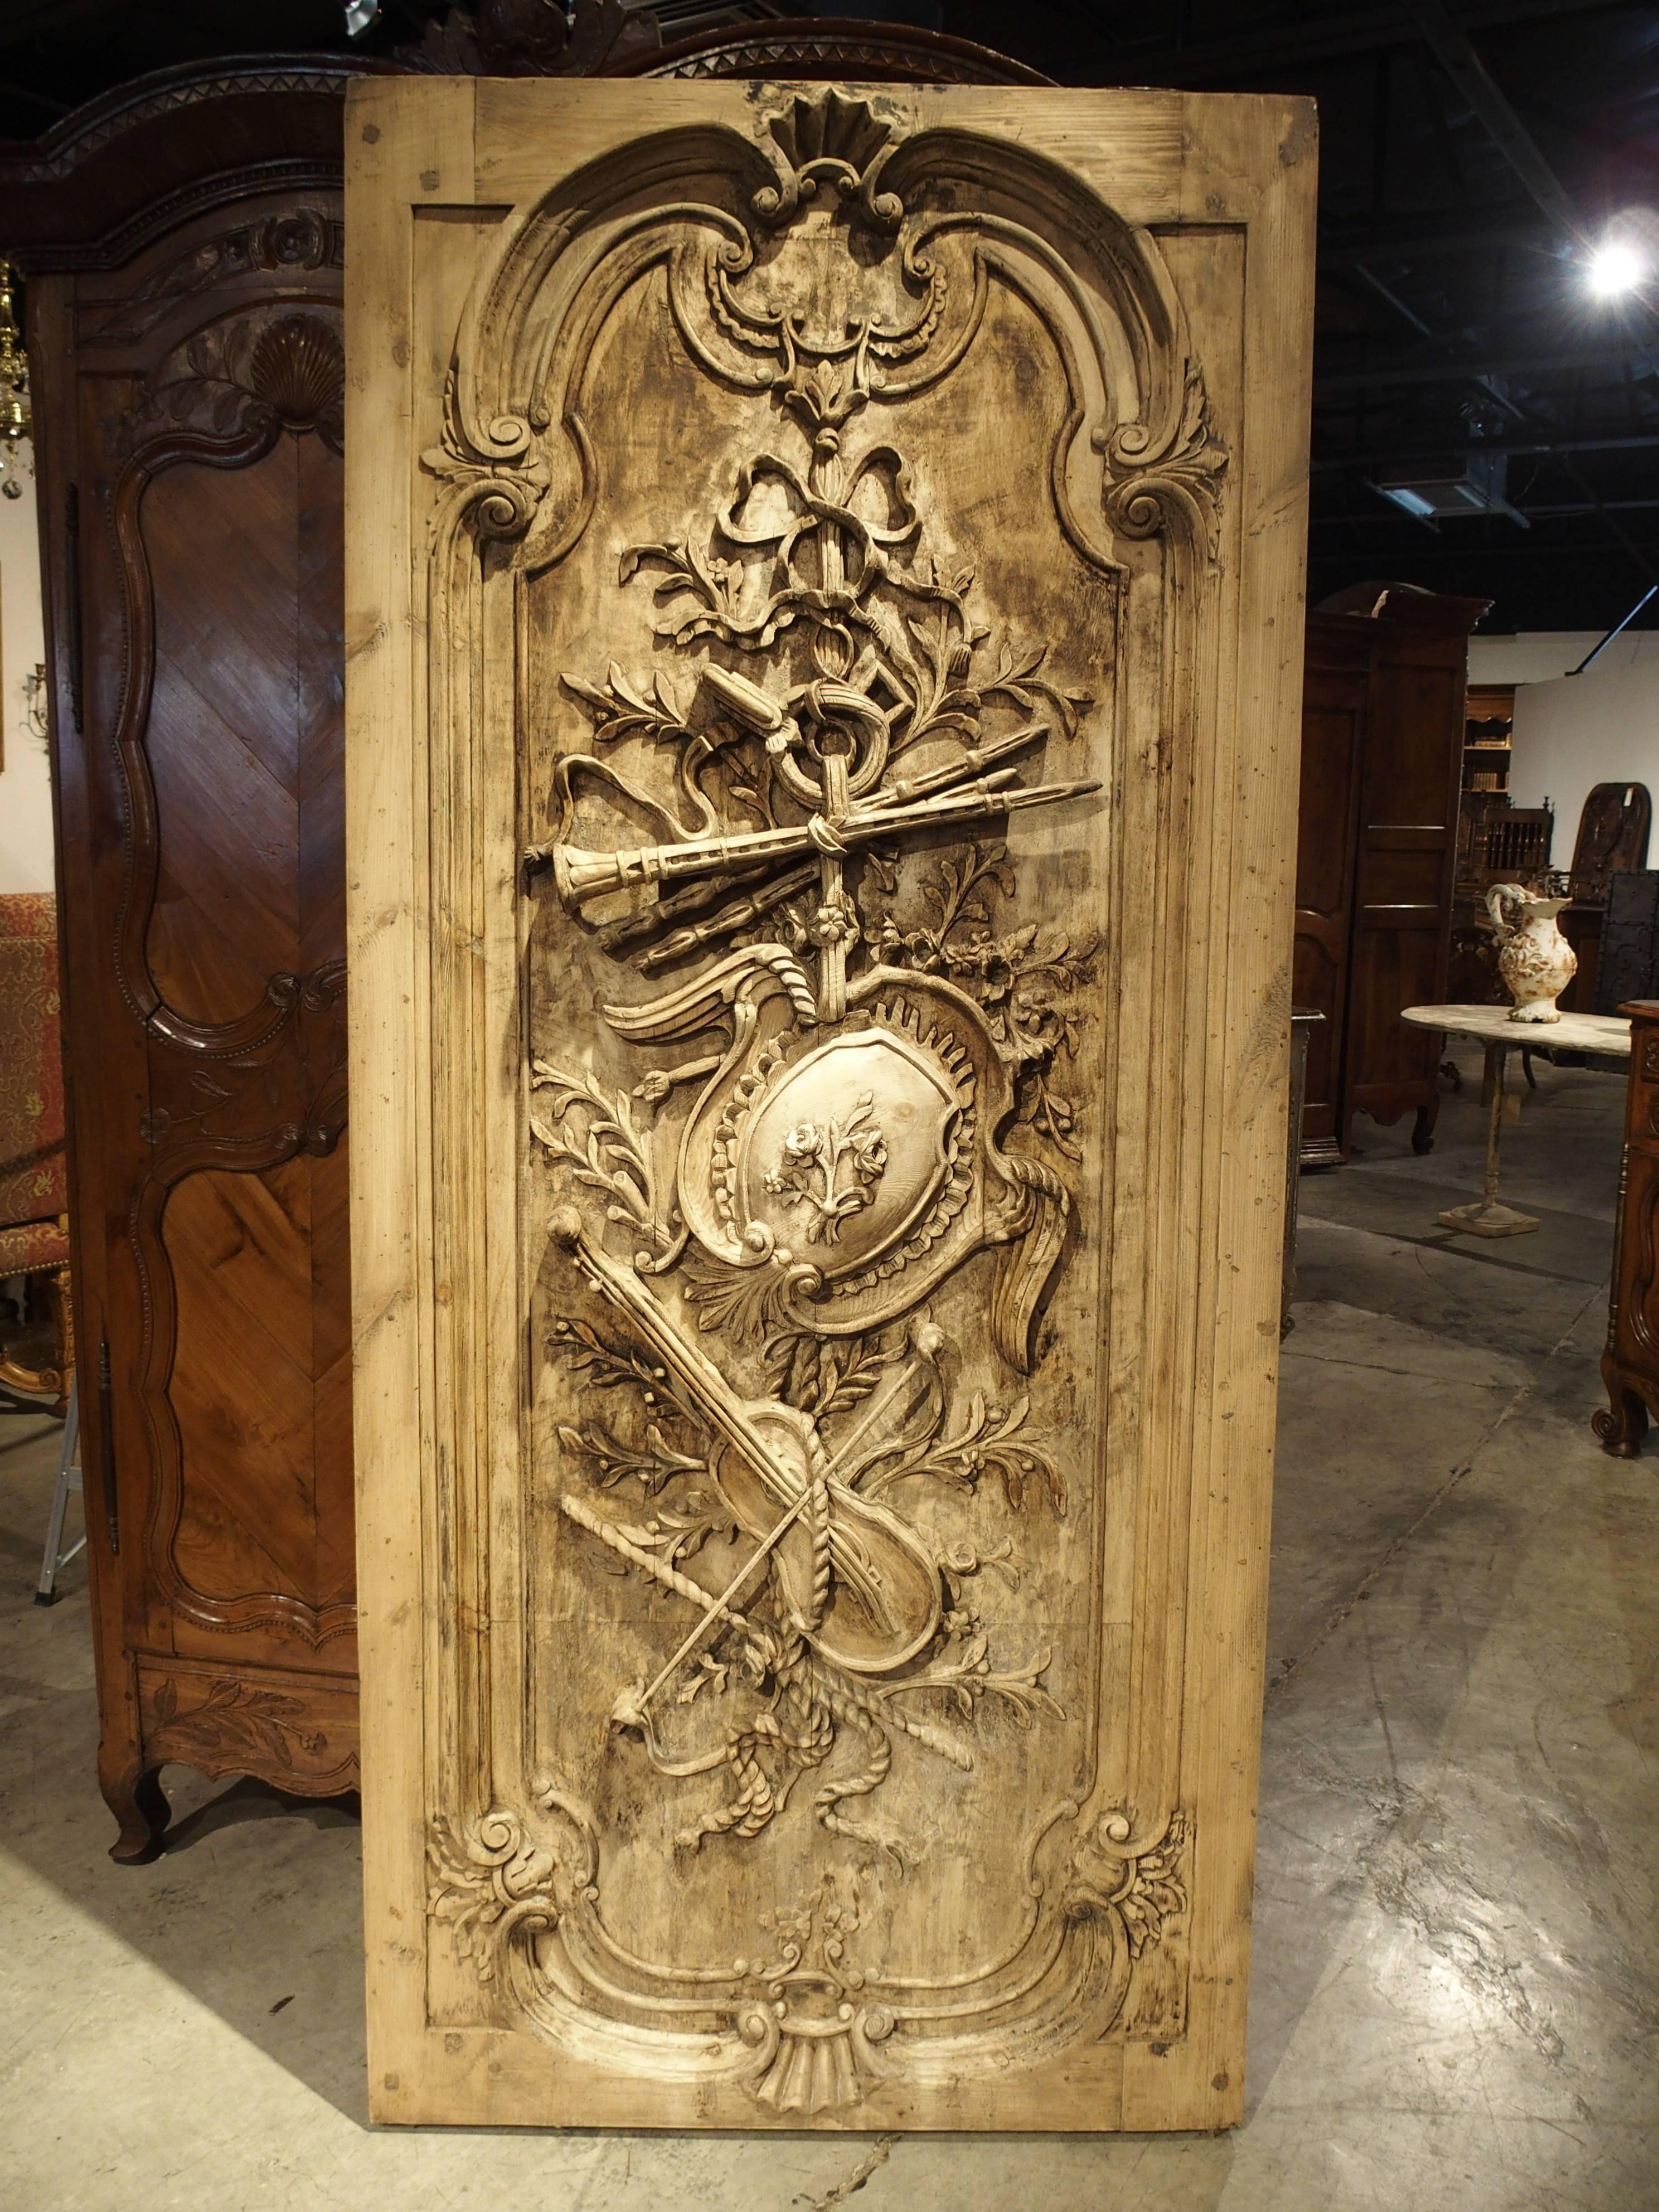 This stunning French interior panel or door, has hand-carved Louis XVI musical trophy ornamentation depicting violins and wind instruments hanging from ribbons and bows. It was created sometime in the 1900s, and the back of the door panel has shaped